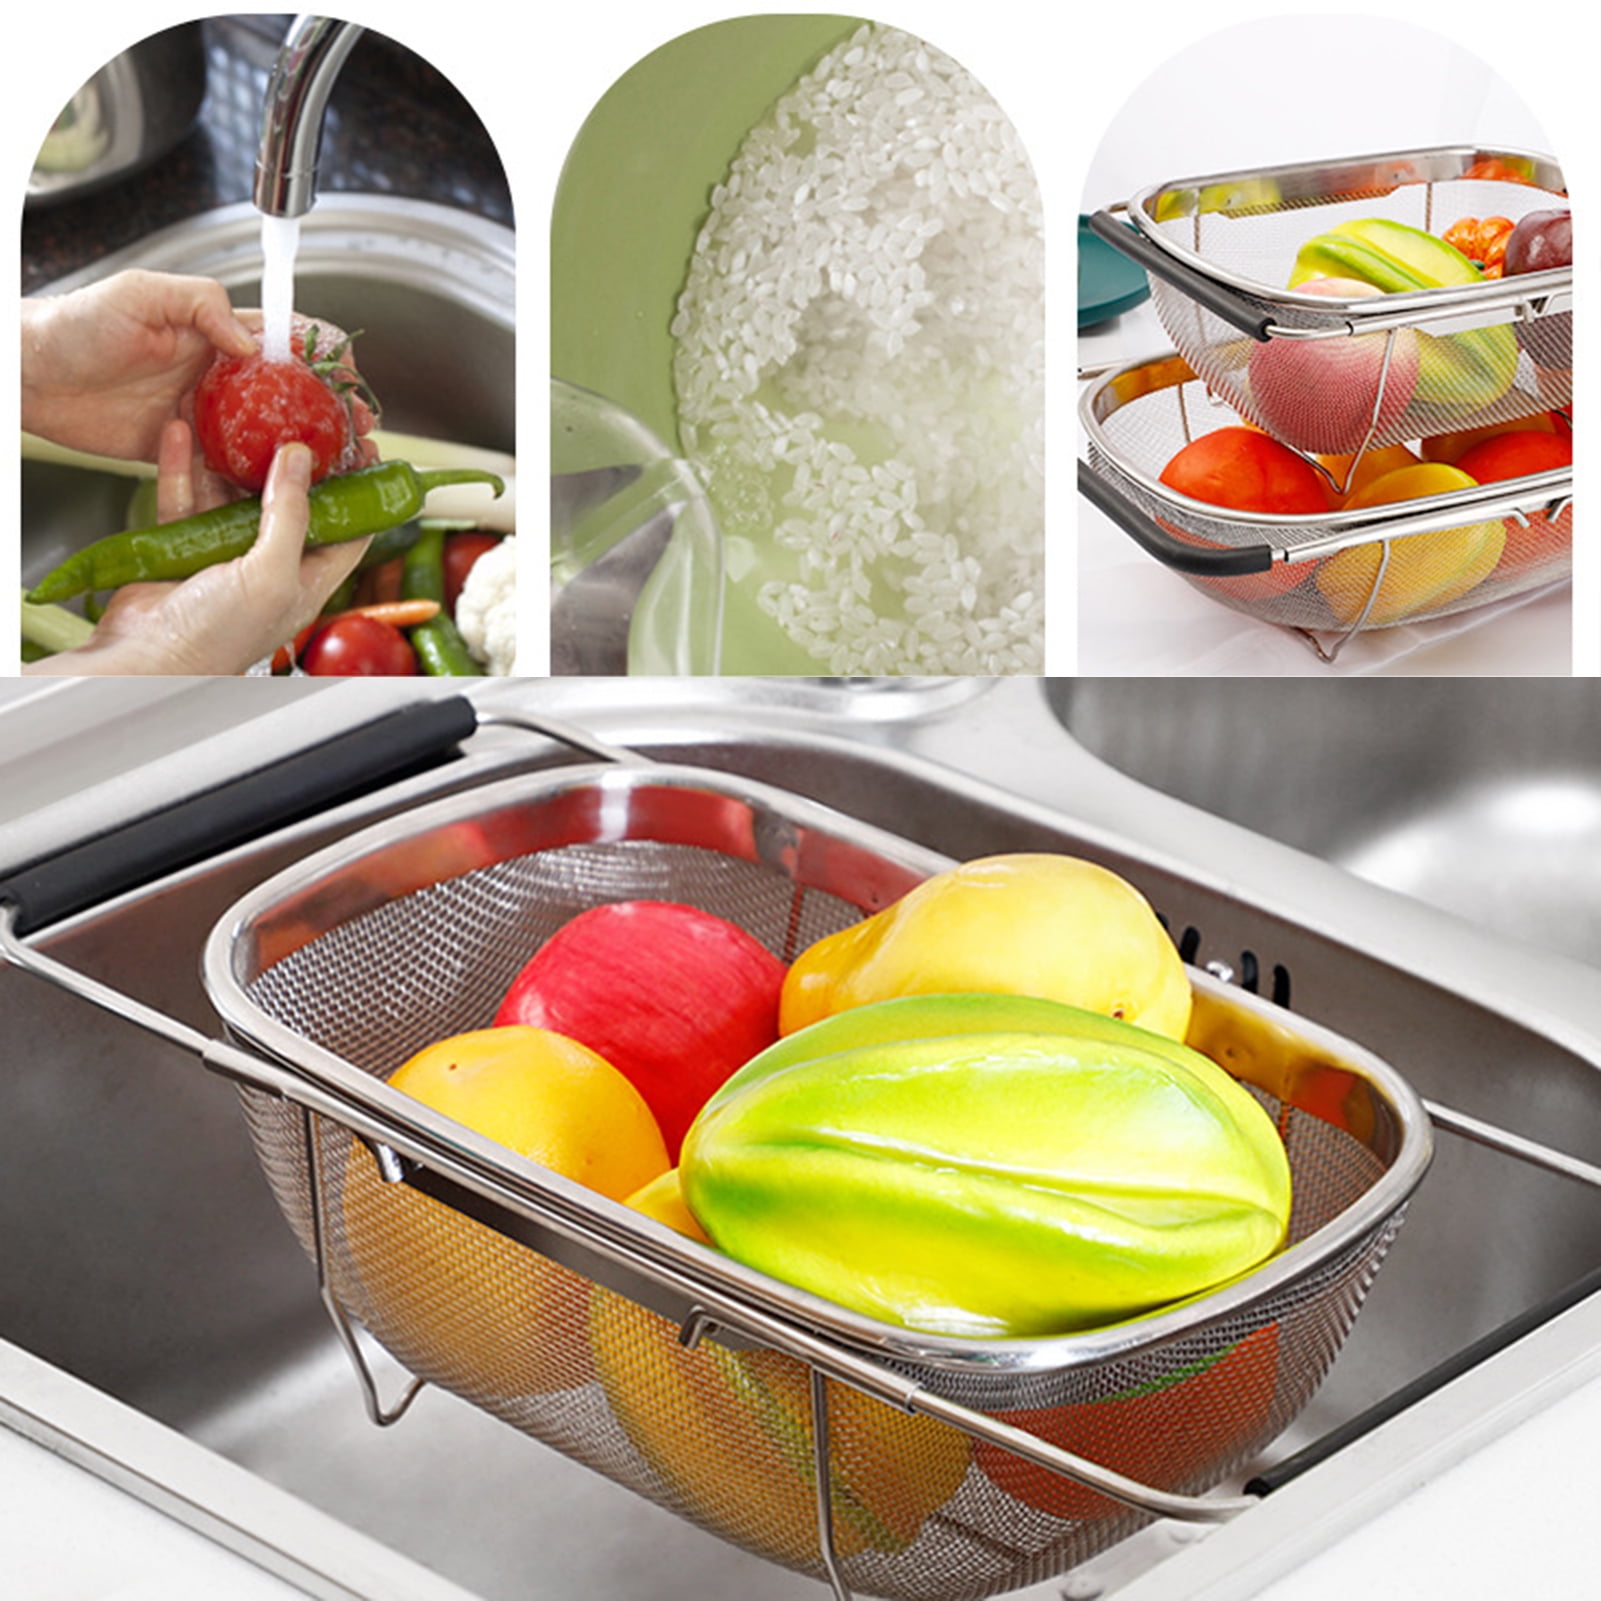 Details about   Stainless Steel Retractable Strainer Colander Washing Rinsing Fruits Vegetables 